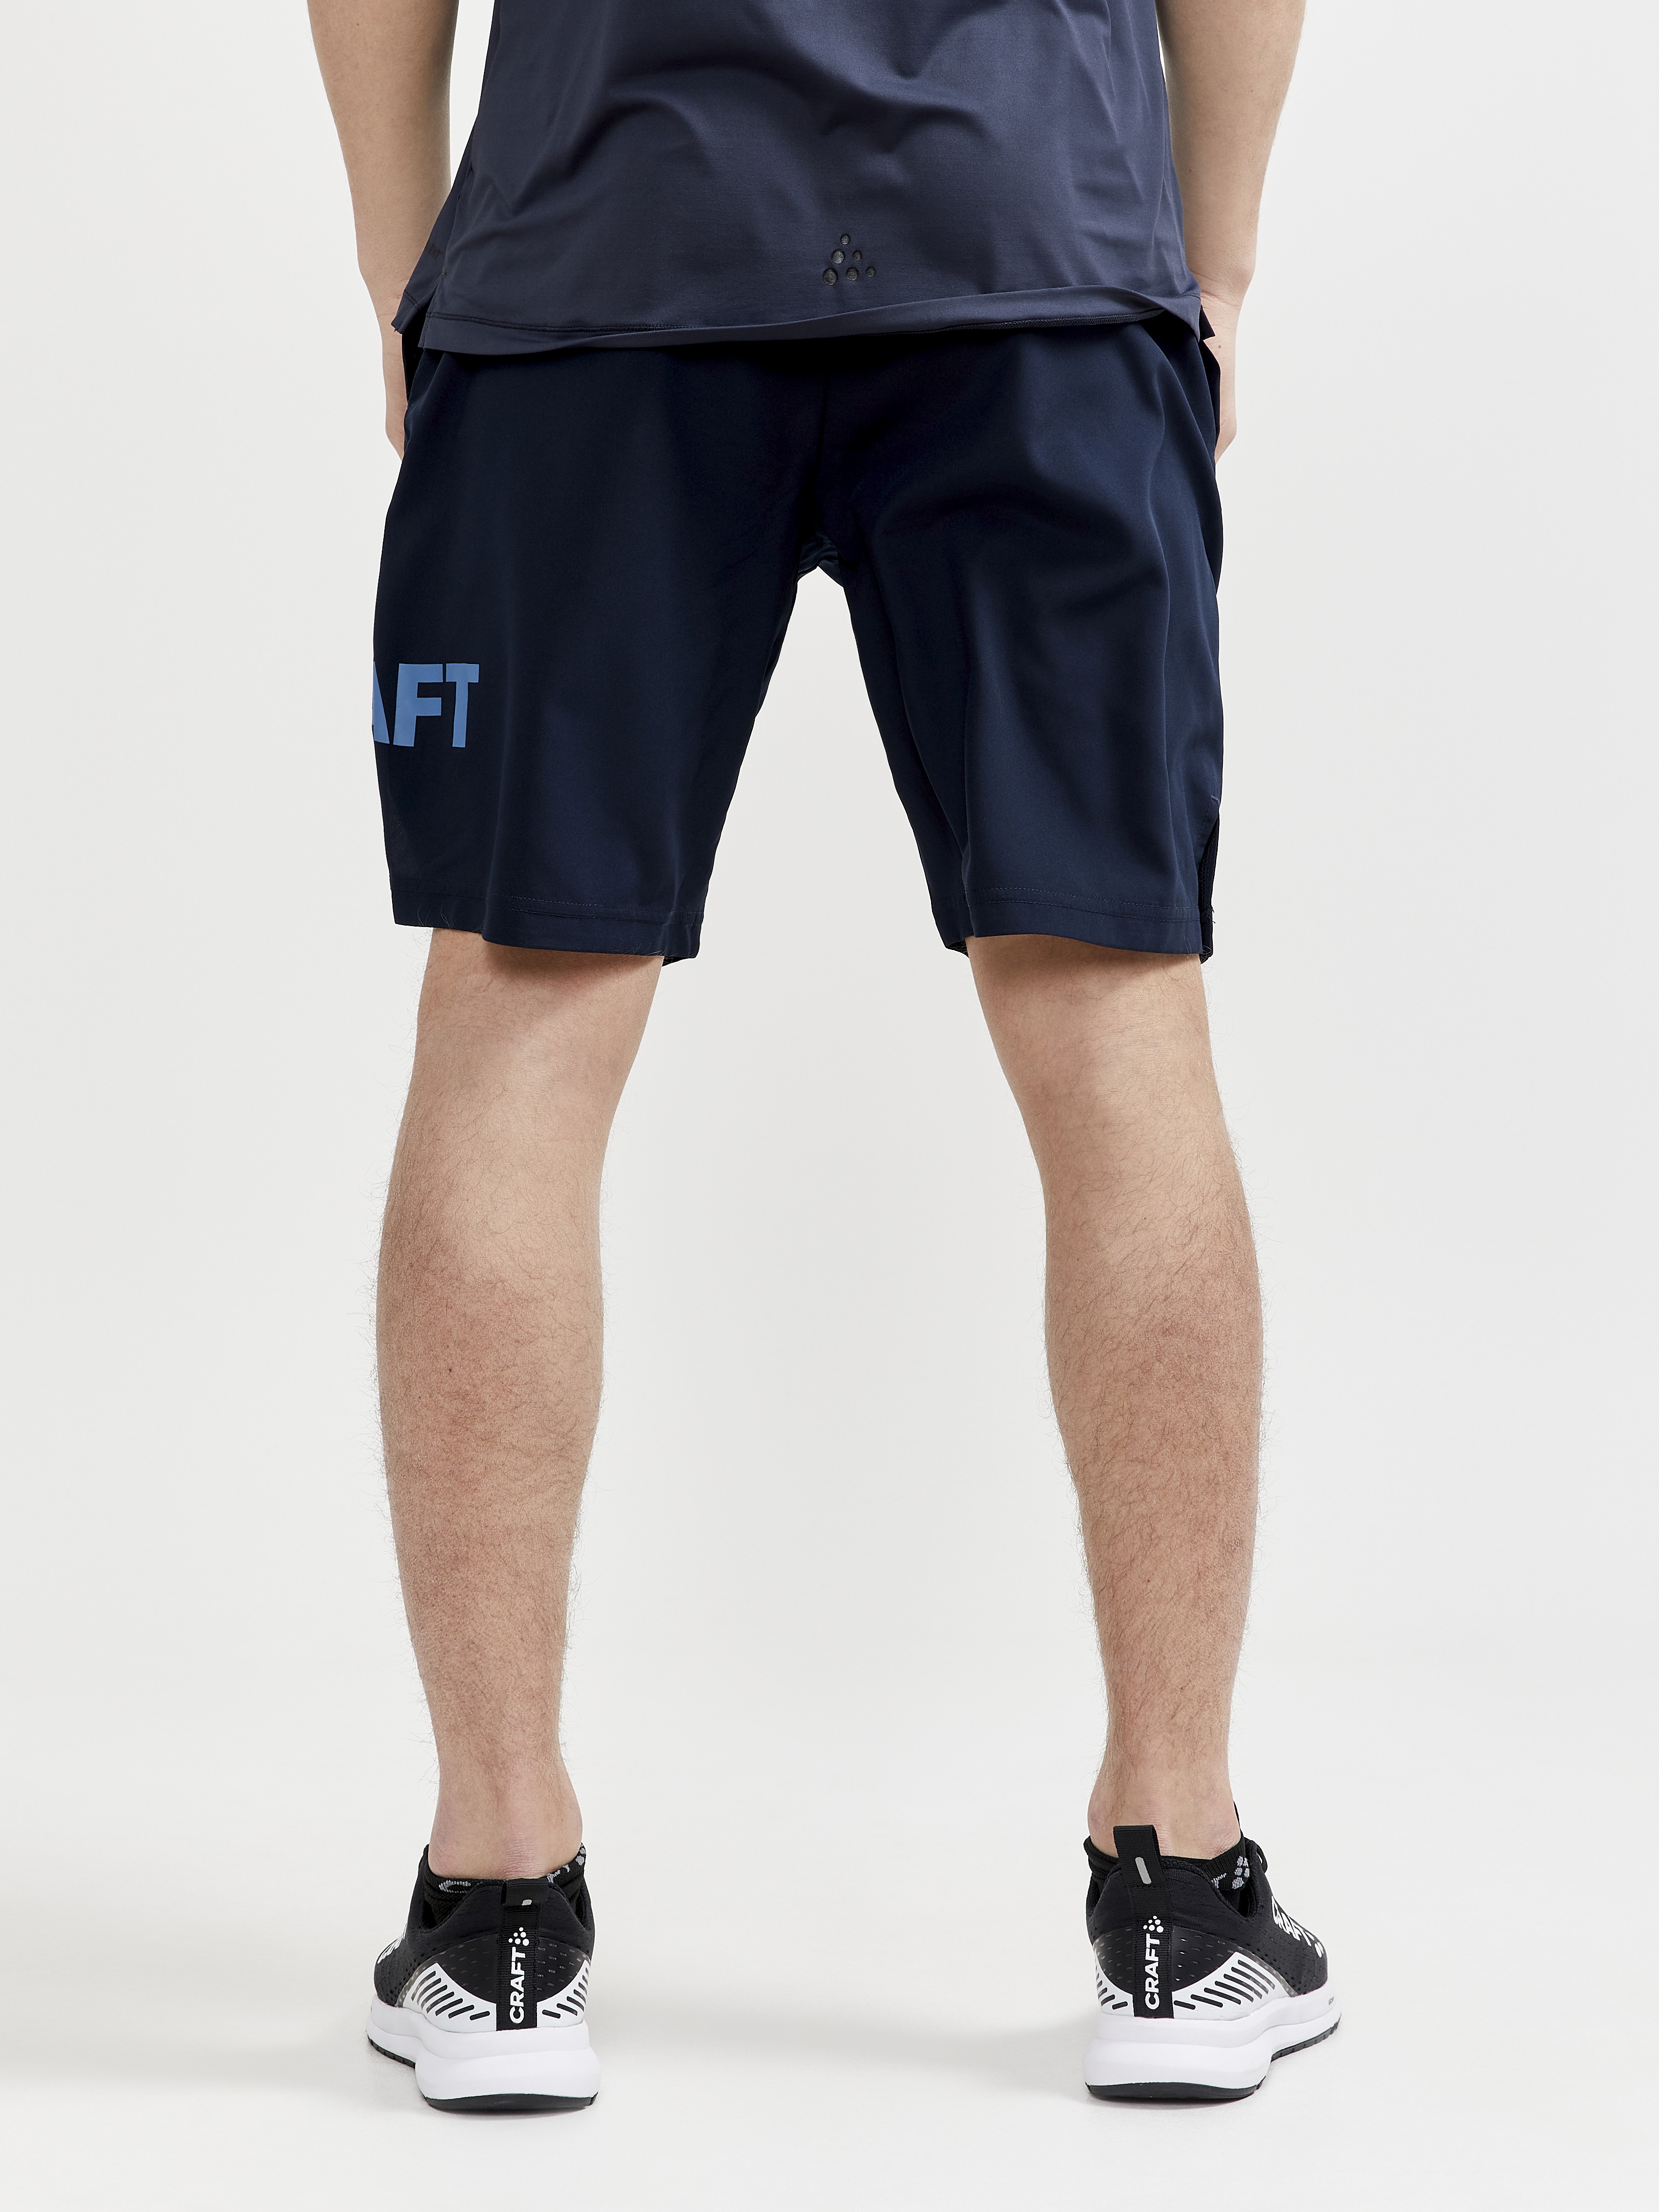 Core Charge Shorts M - Navy blue | Craft Sportswear